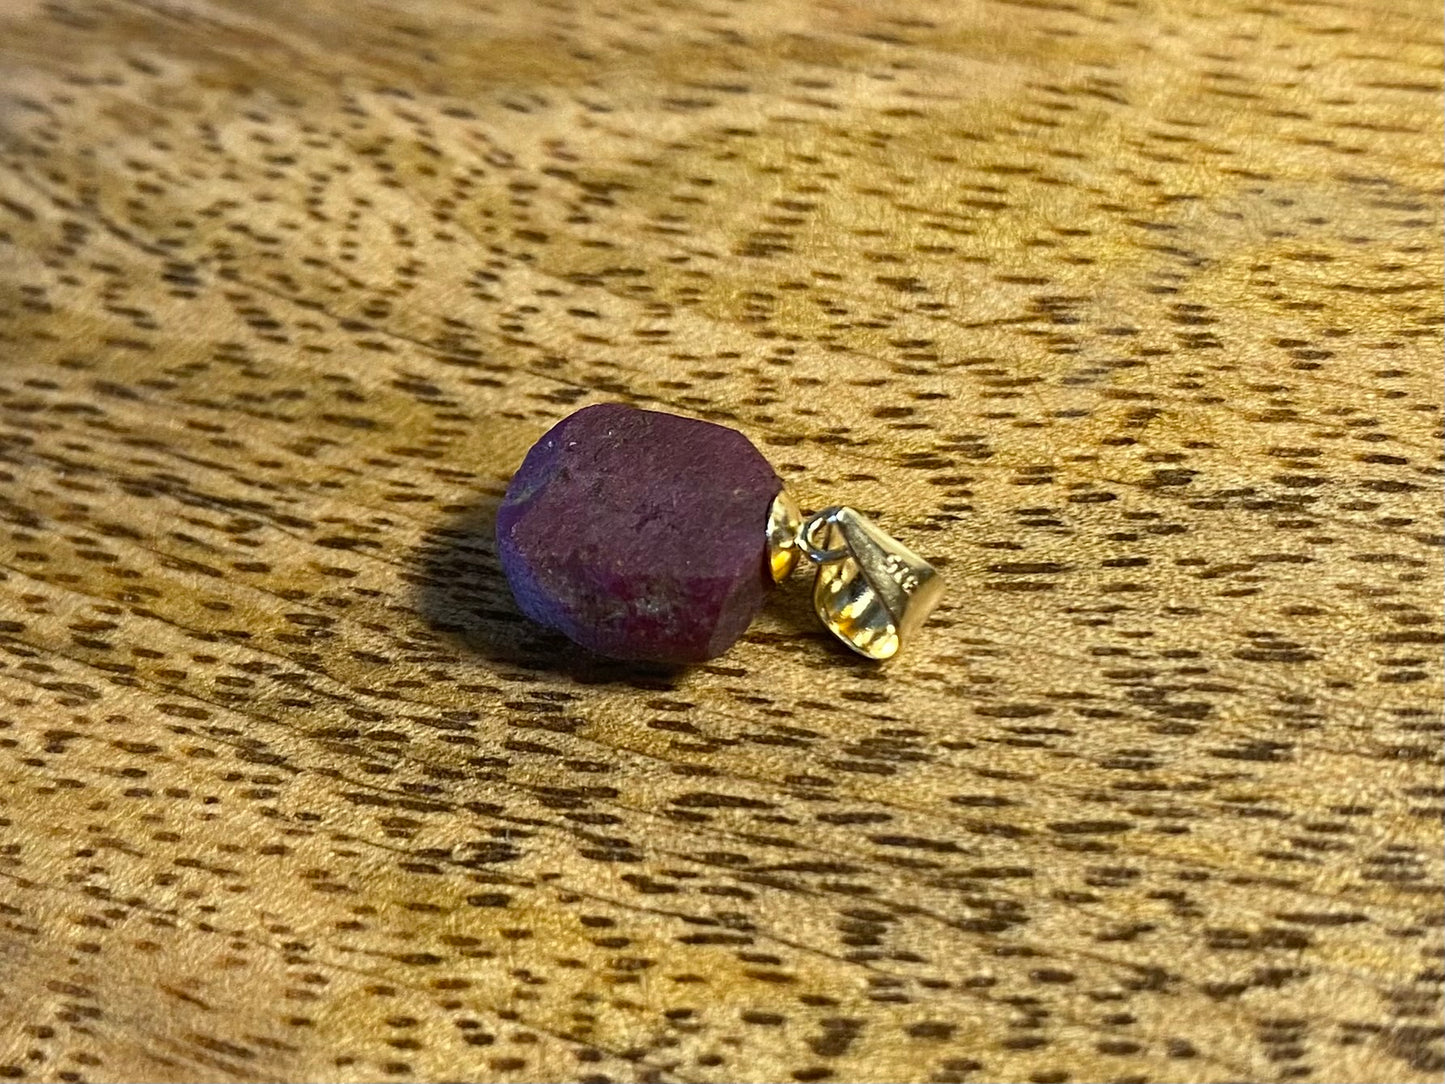 9ct Gold Ruby Pendant, 925 Sterling Silver Pendant, 10mm Natural Red Ruby Necklace Pendant, Cute Minimalist 9k Raw Crystal Jewellery